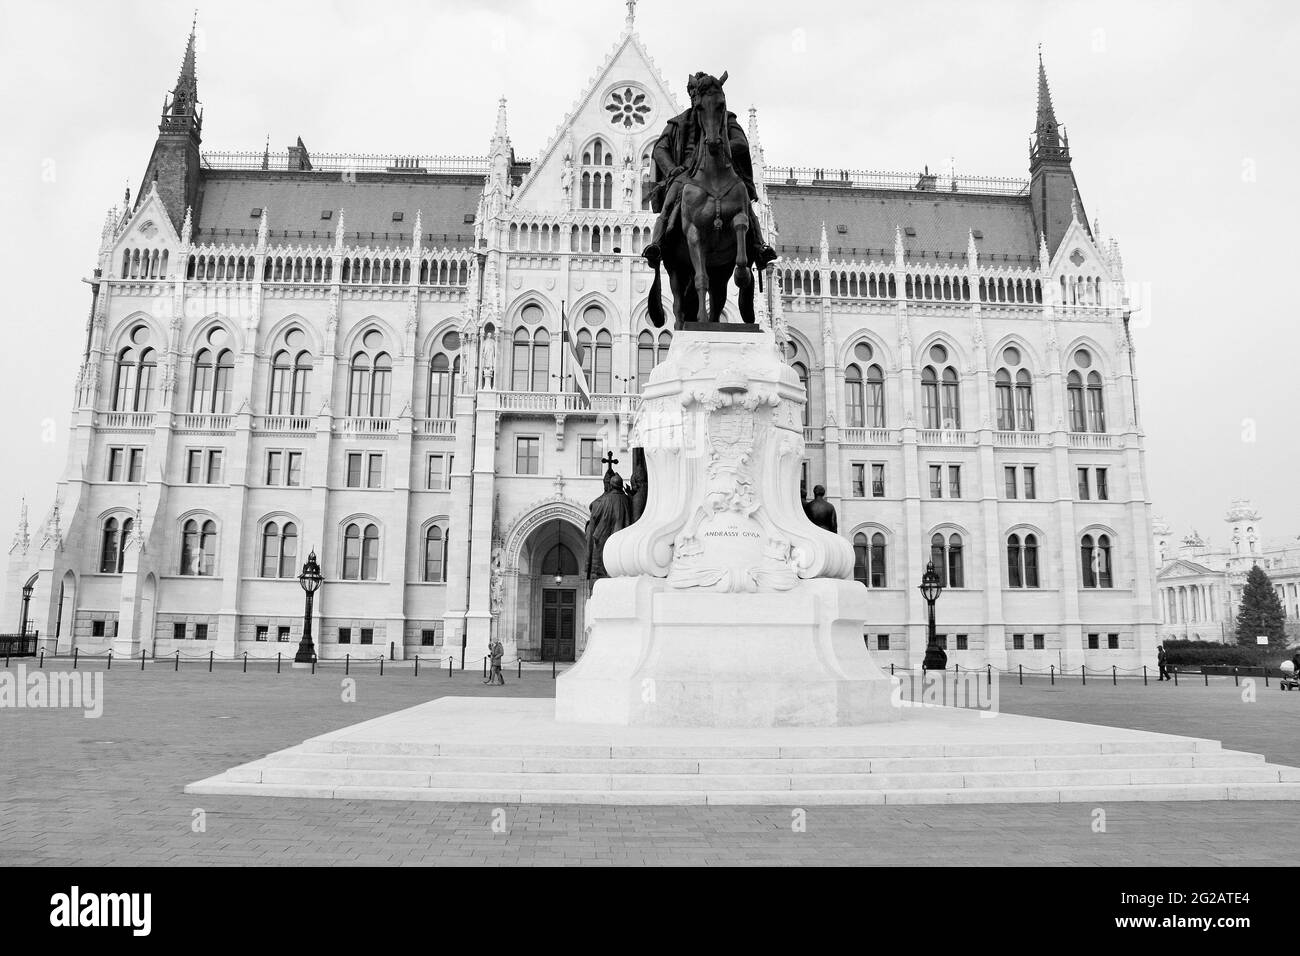 The Hungarian Parliament Building, also known as the Parliament of Budapest Stock Photo